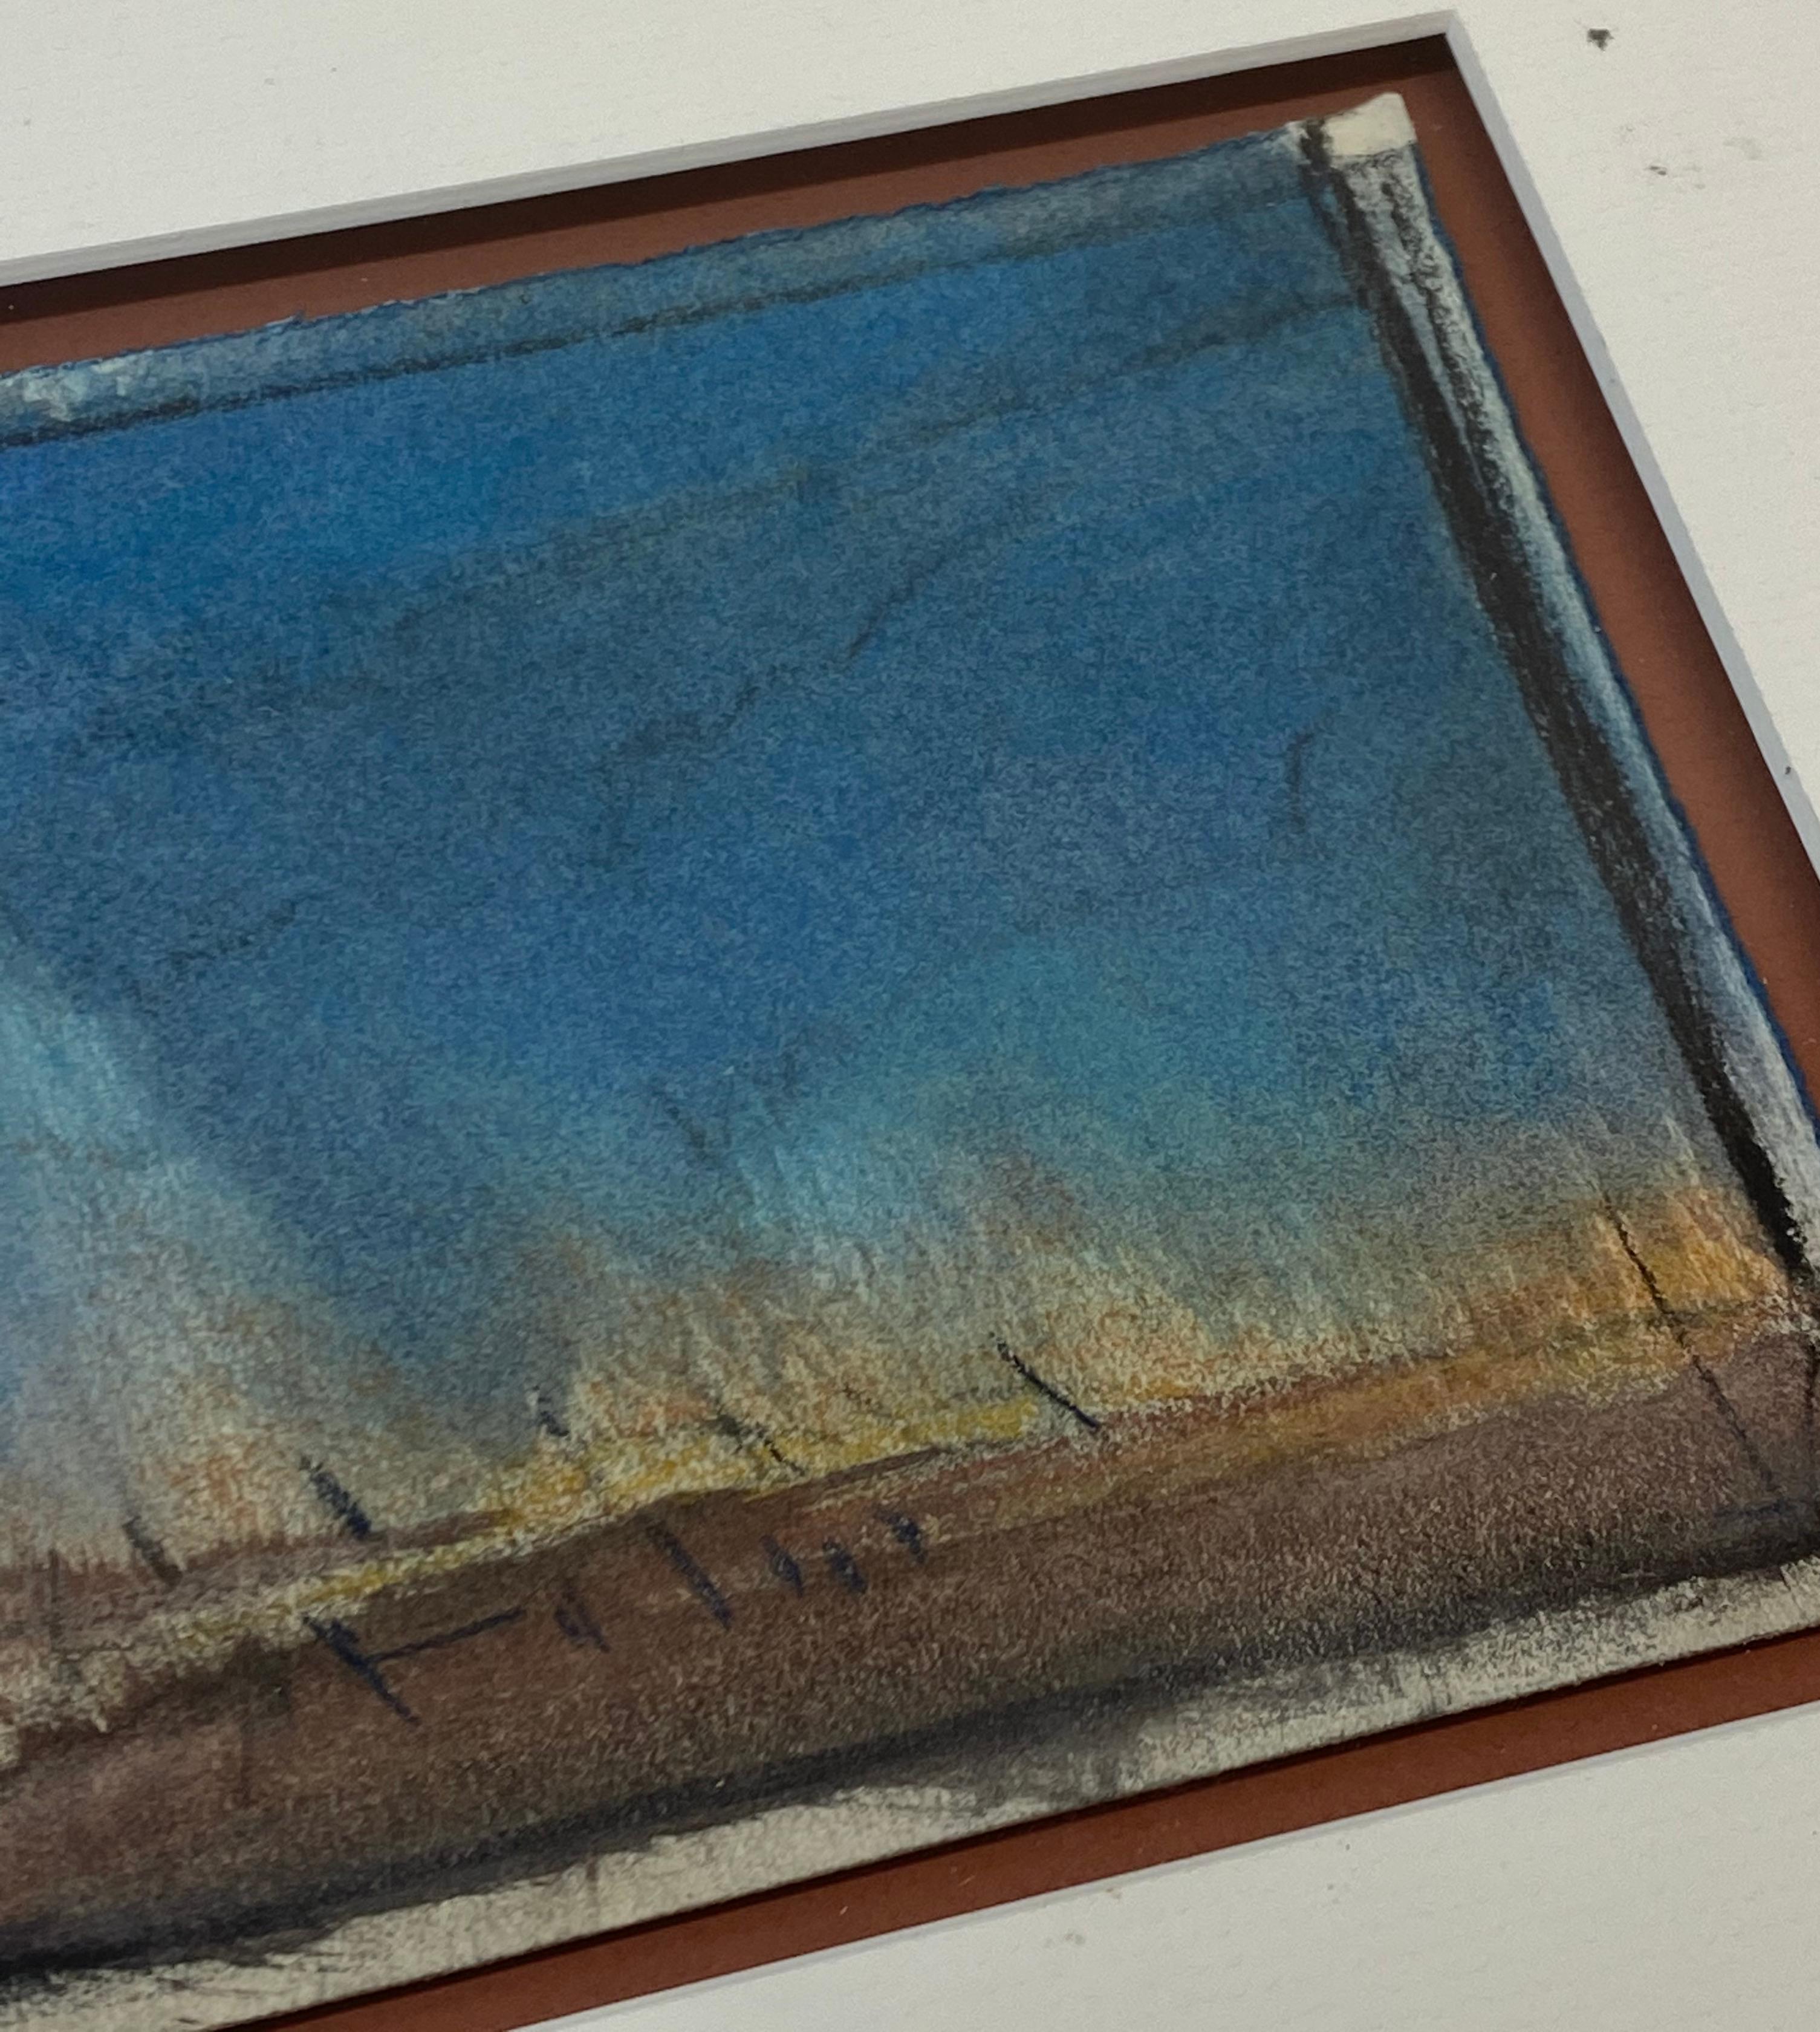 Sidney Robert Nolan Abstract Pastel Landscape Diptych 20th C.

Each pastel measures 5.5